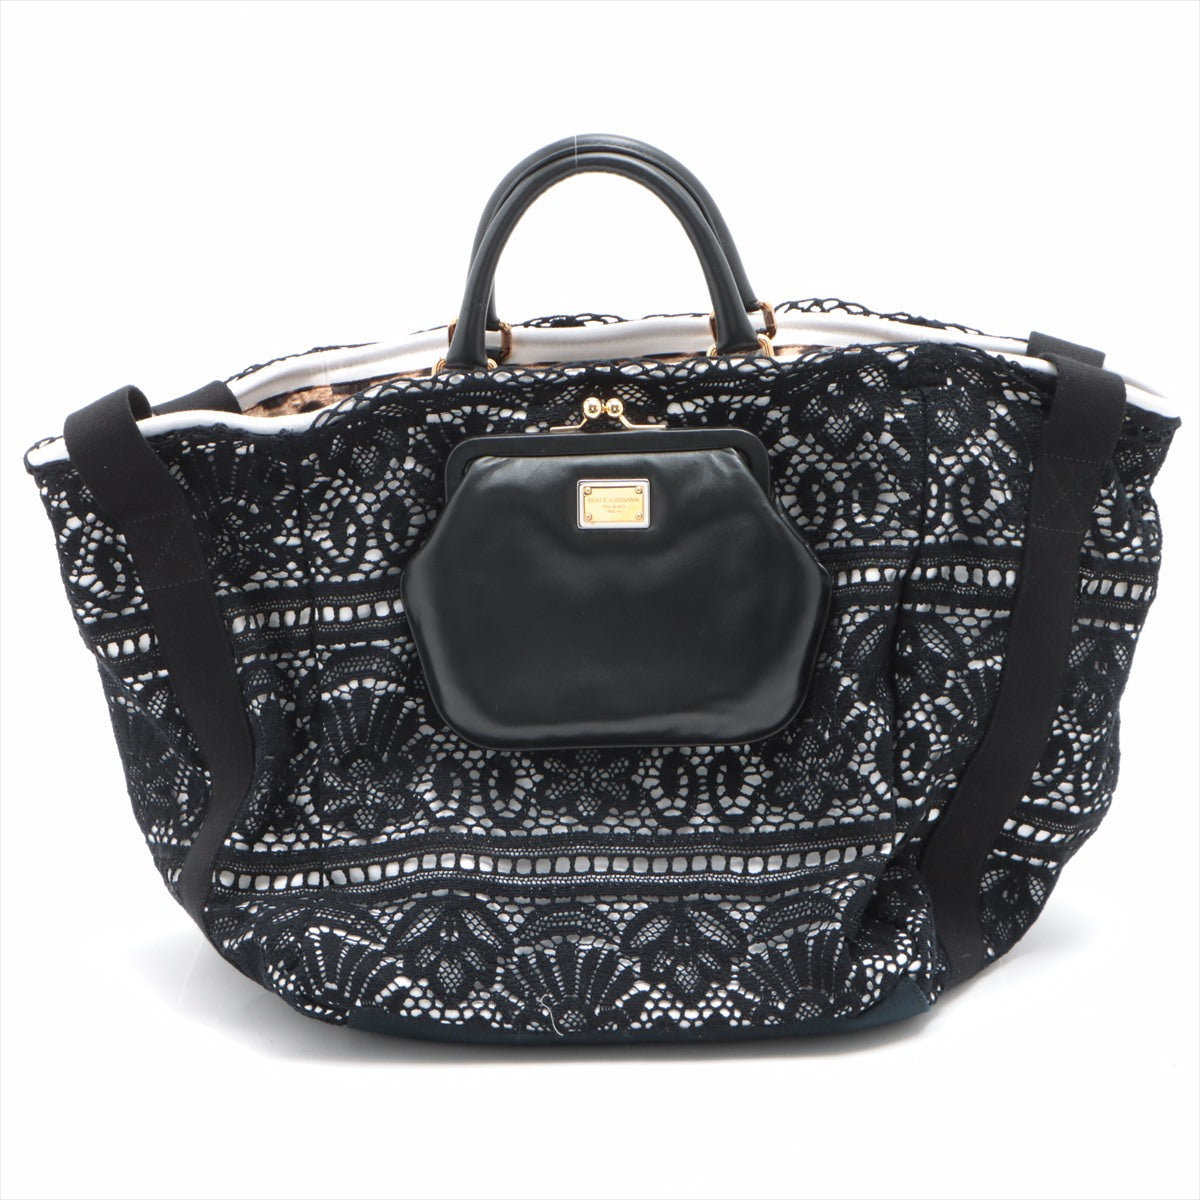 Dolce & Gabbana canvass 2 way tote bag Black open papers